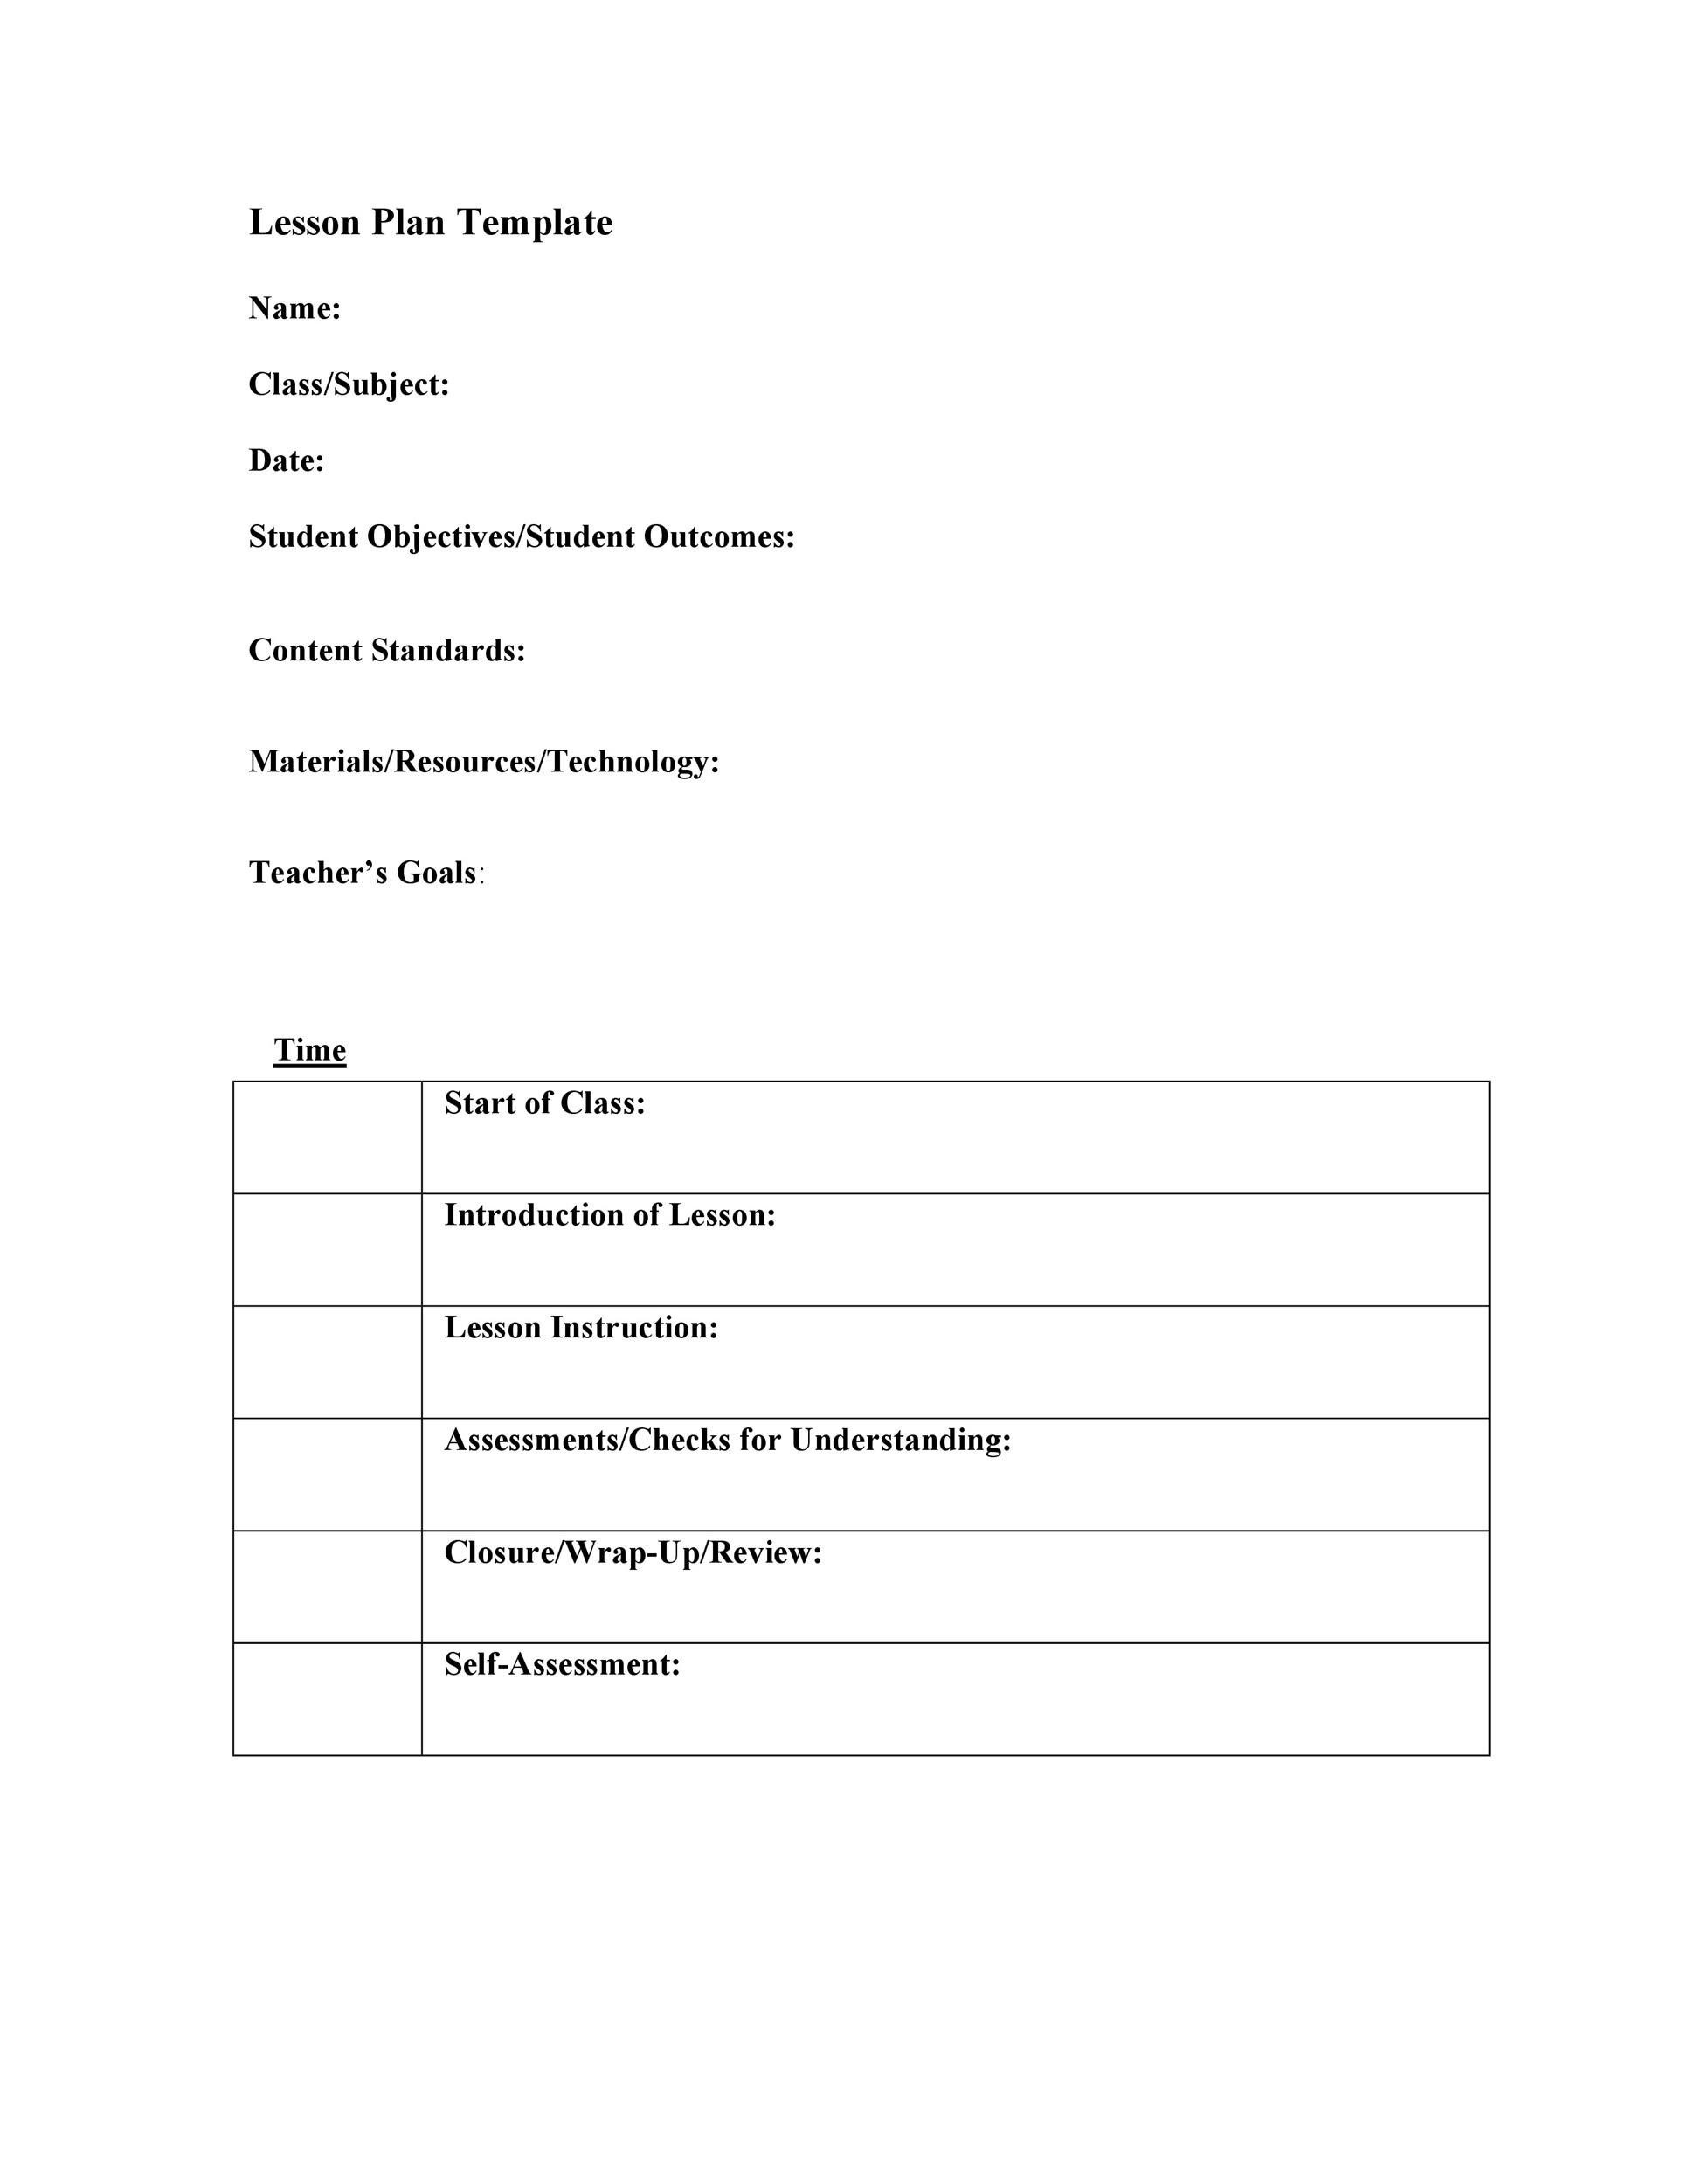 Free lesson plan template 31